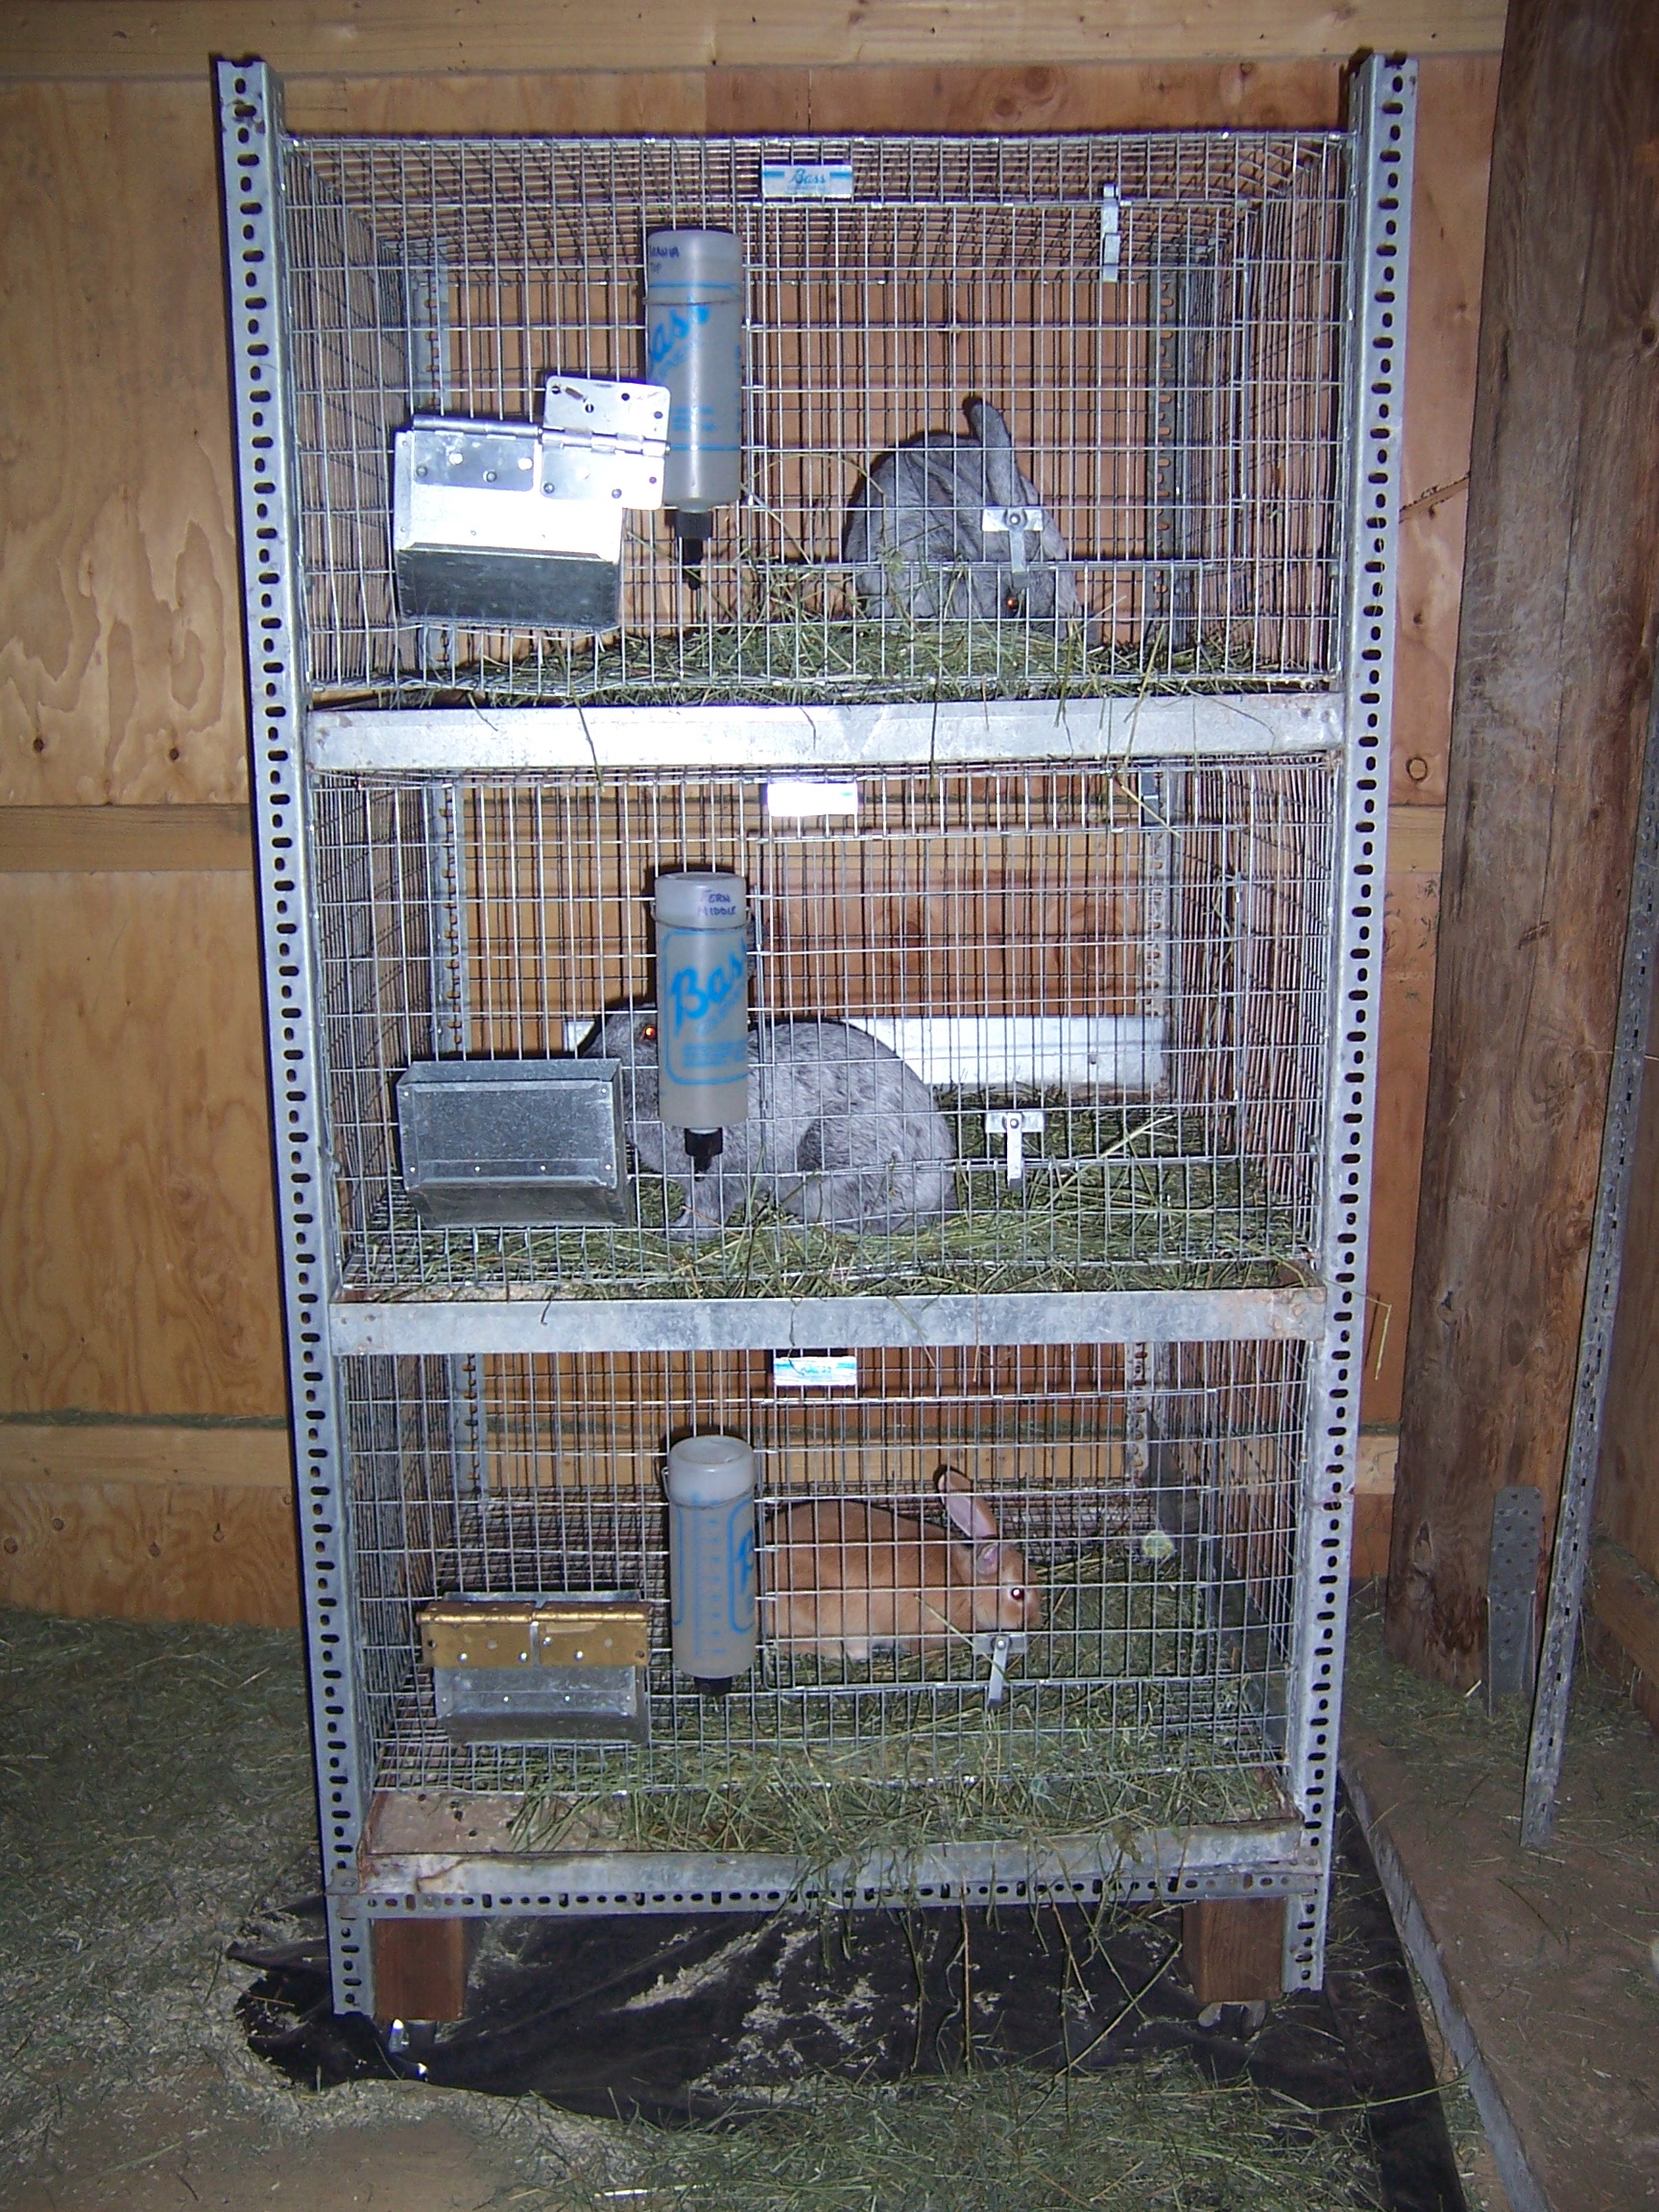 Our first set up involved stacking three of these cages with metal    hardware cloth rabbits